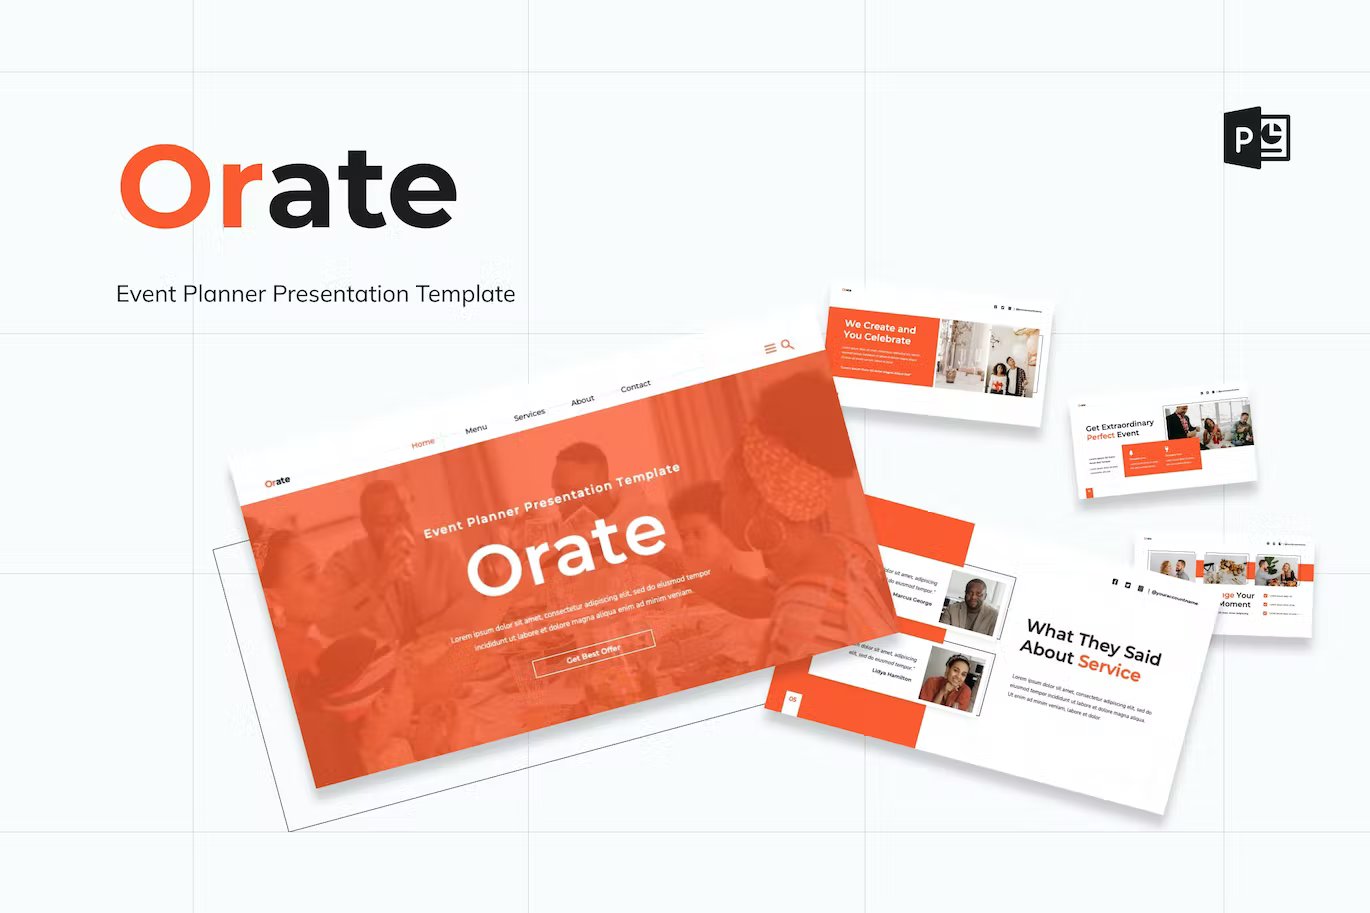 Red and black lettering "Orate Event Planner Presentation Template" and different presentation templates on a gray background.